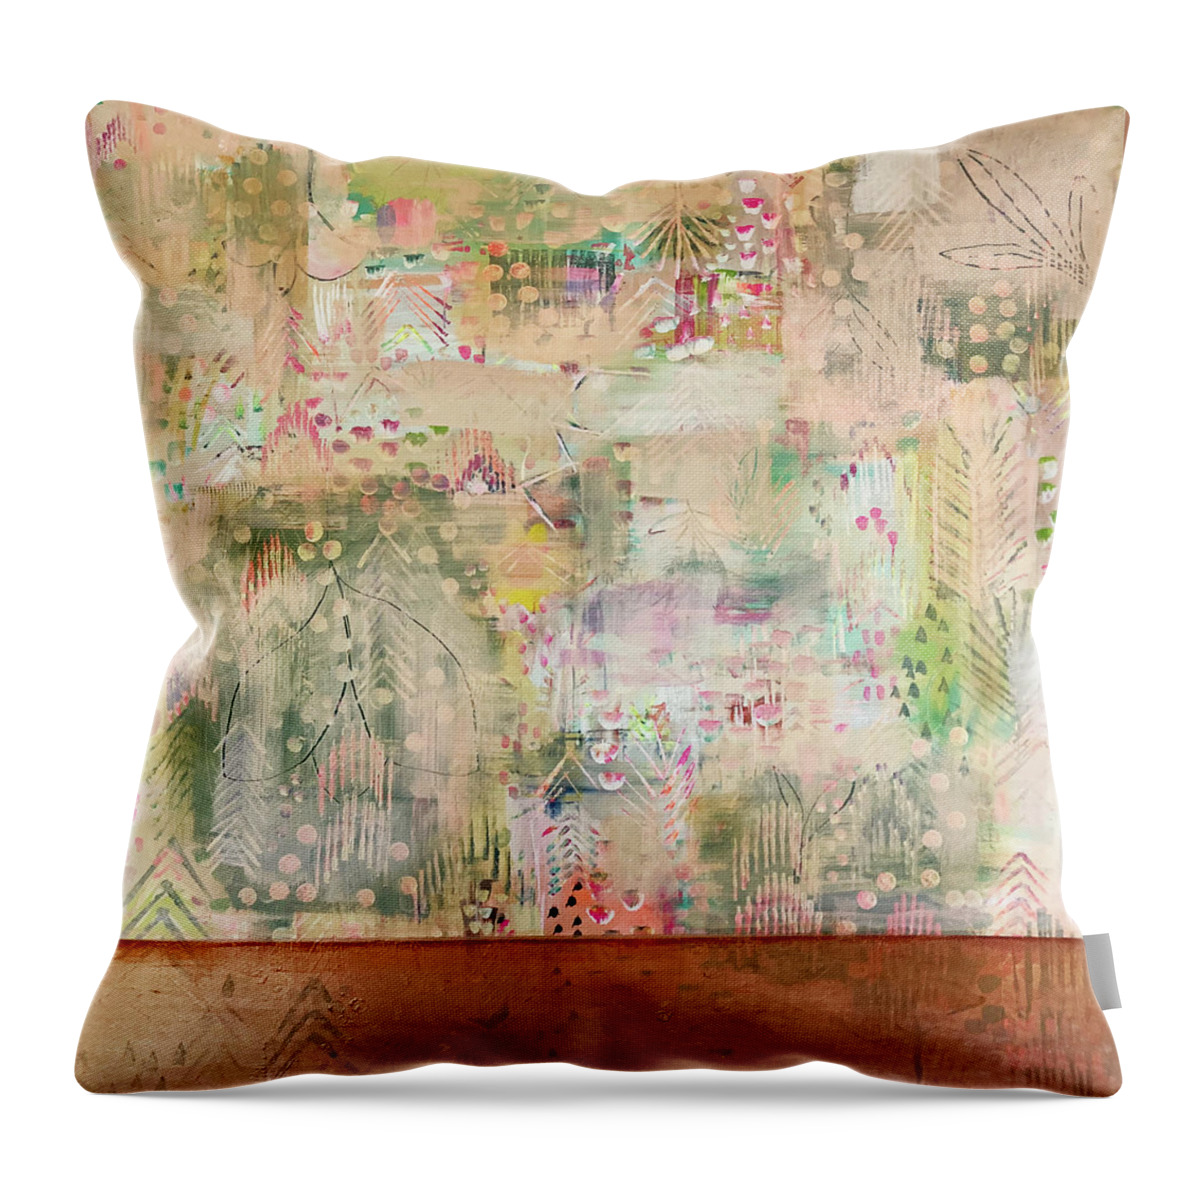 Intuitive Painting Throw Pillow featuring the drawing Intuitive Painting by Claudia Schoen